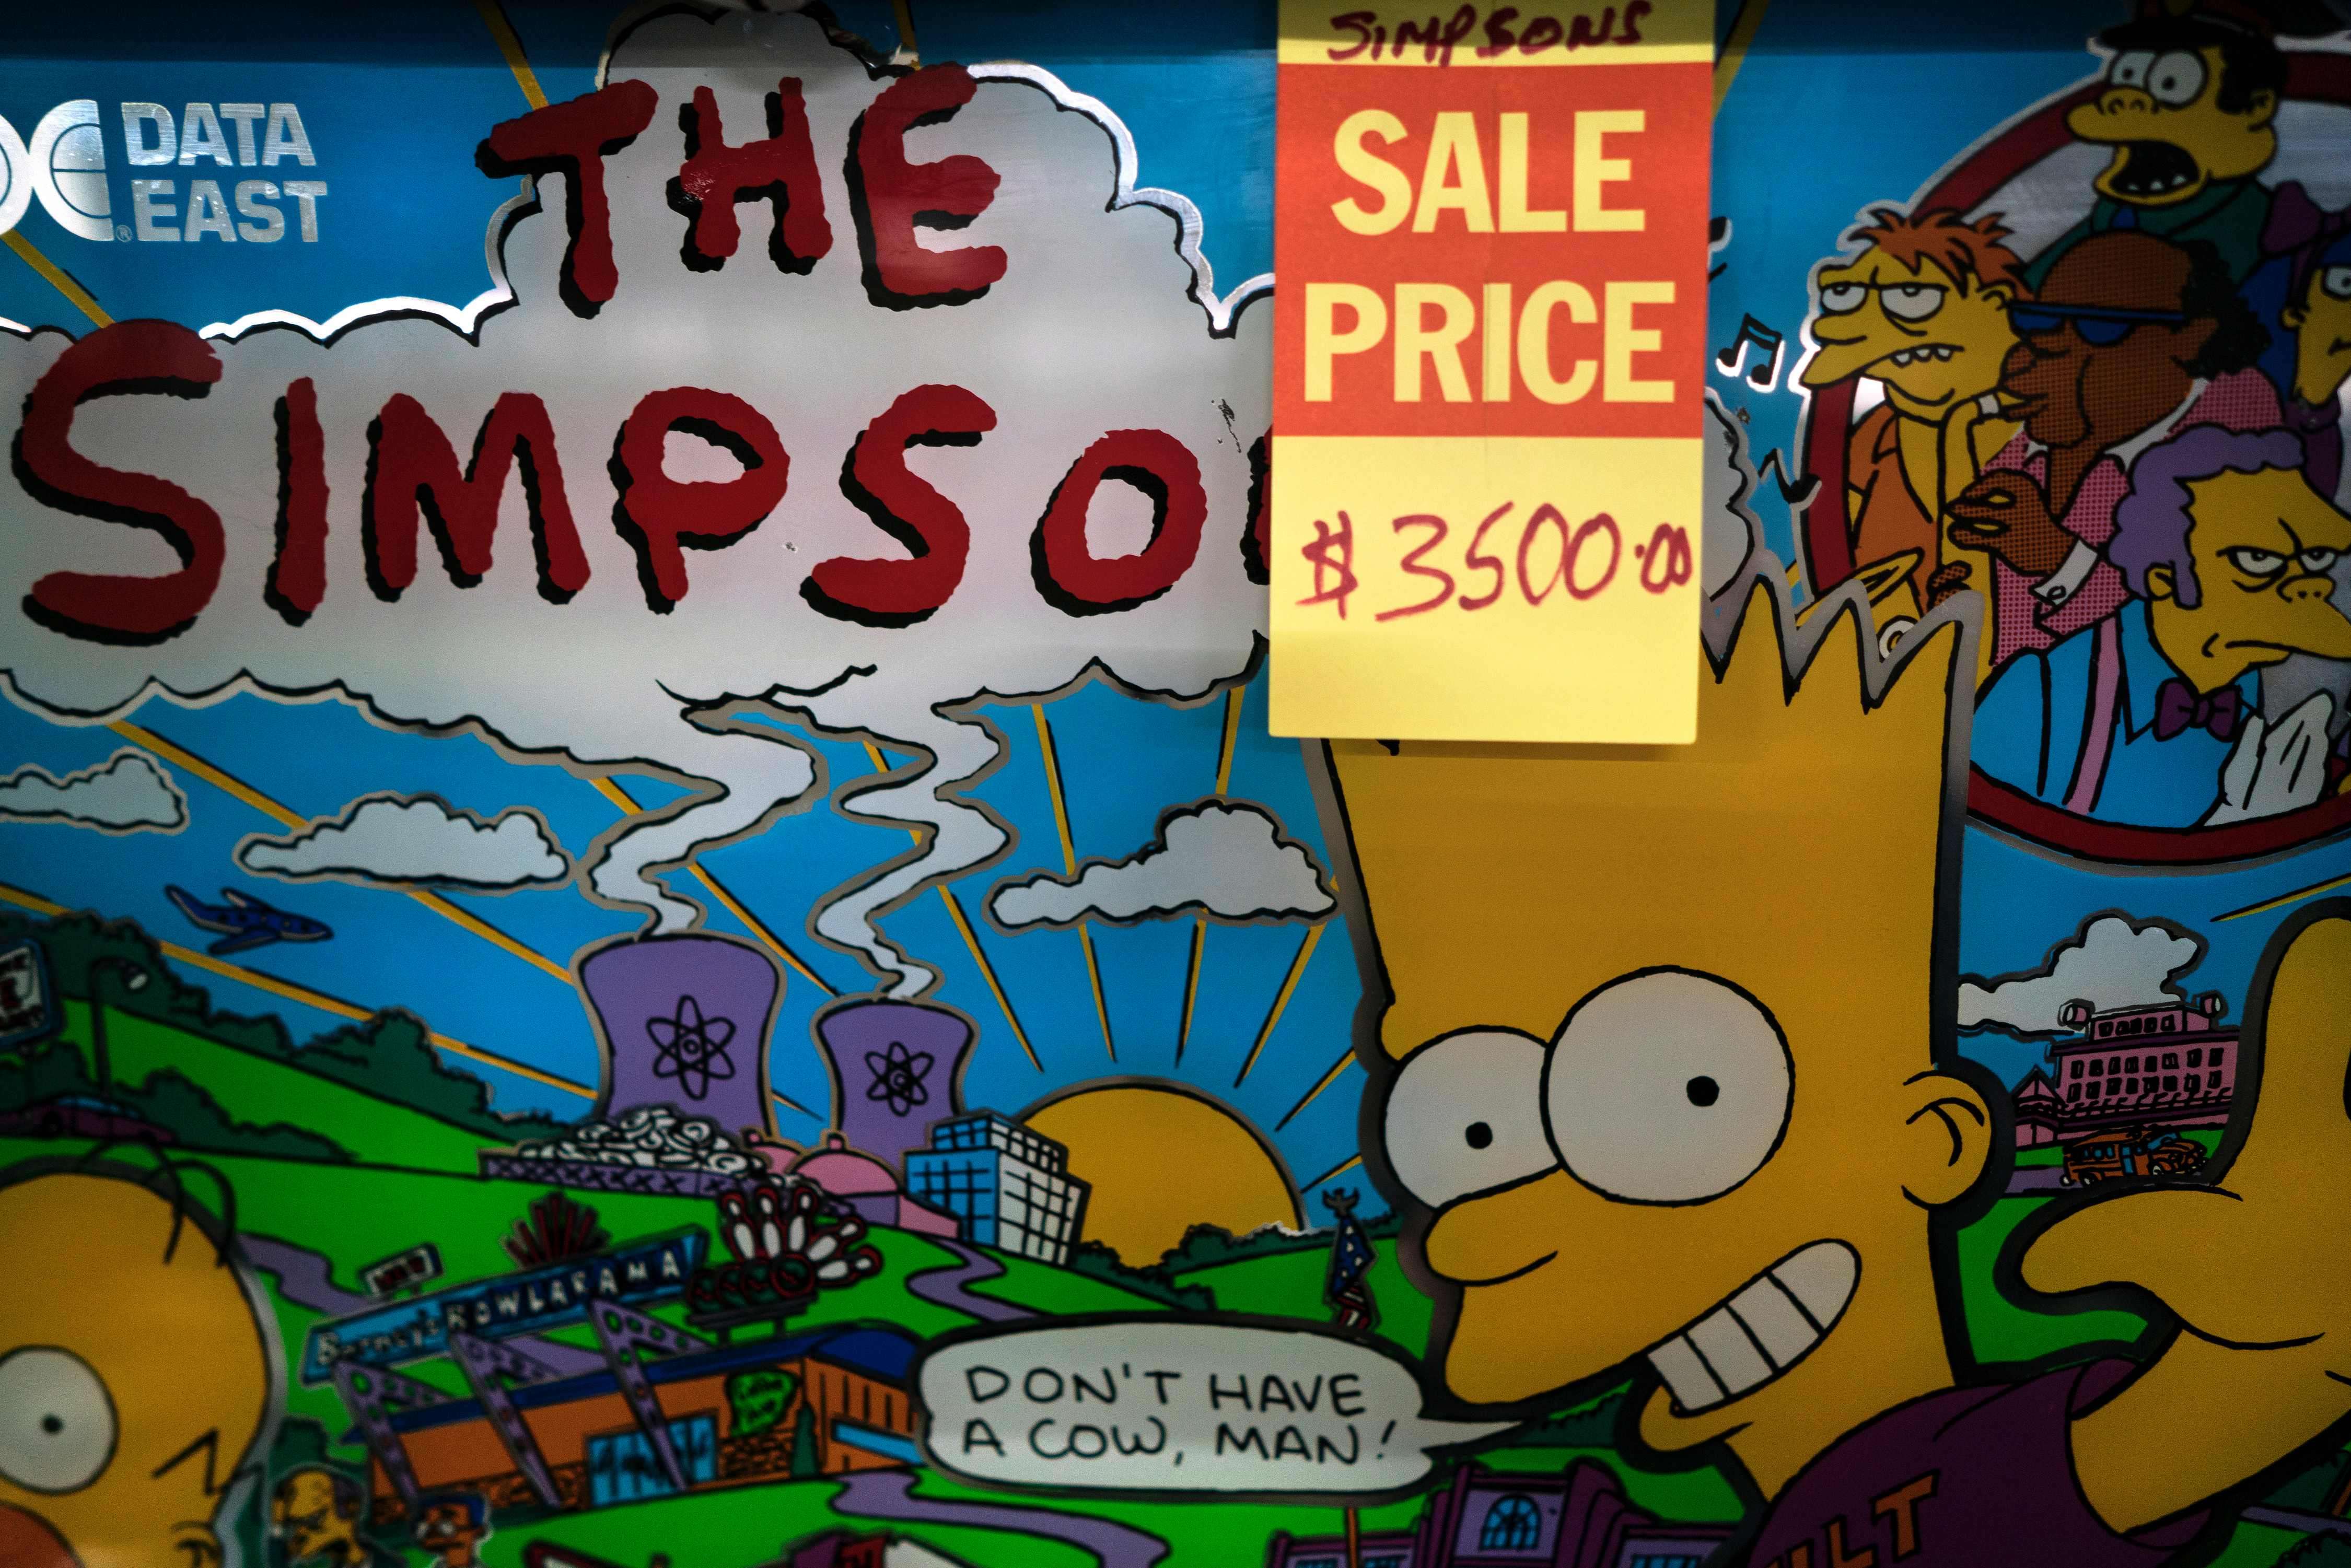 A Simpsons pinball machine for sale at a shop in Maryland. China should clearly spell out that a harmonious, prosperous, powerful yet responsible United States constitutes part of the favourable external environment that China wishes to see. Photo: AFP